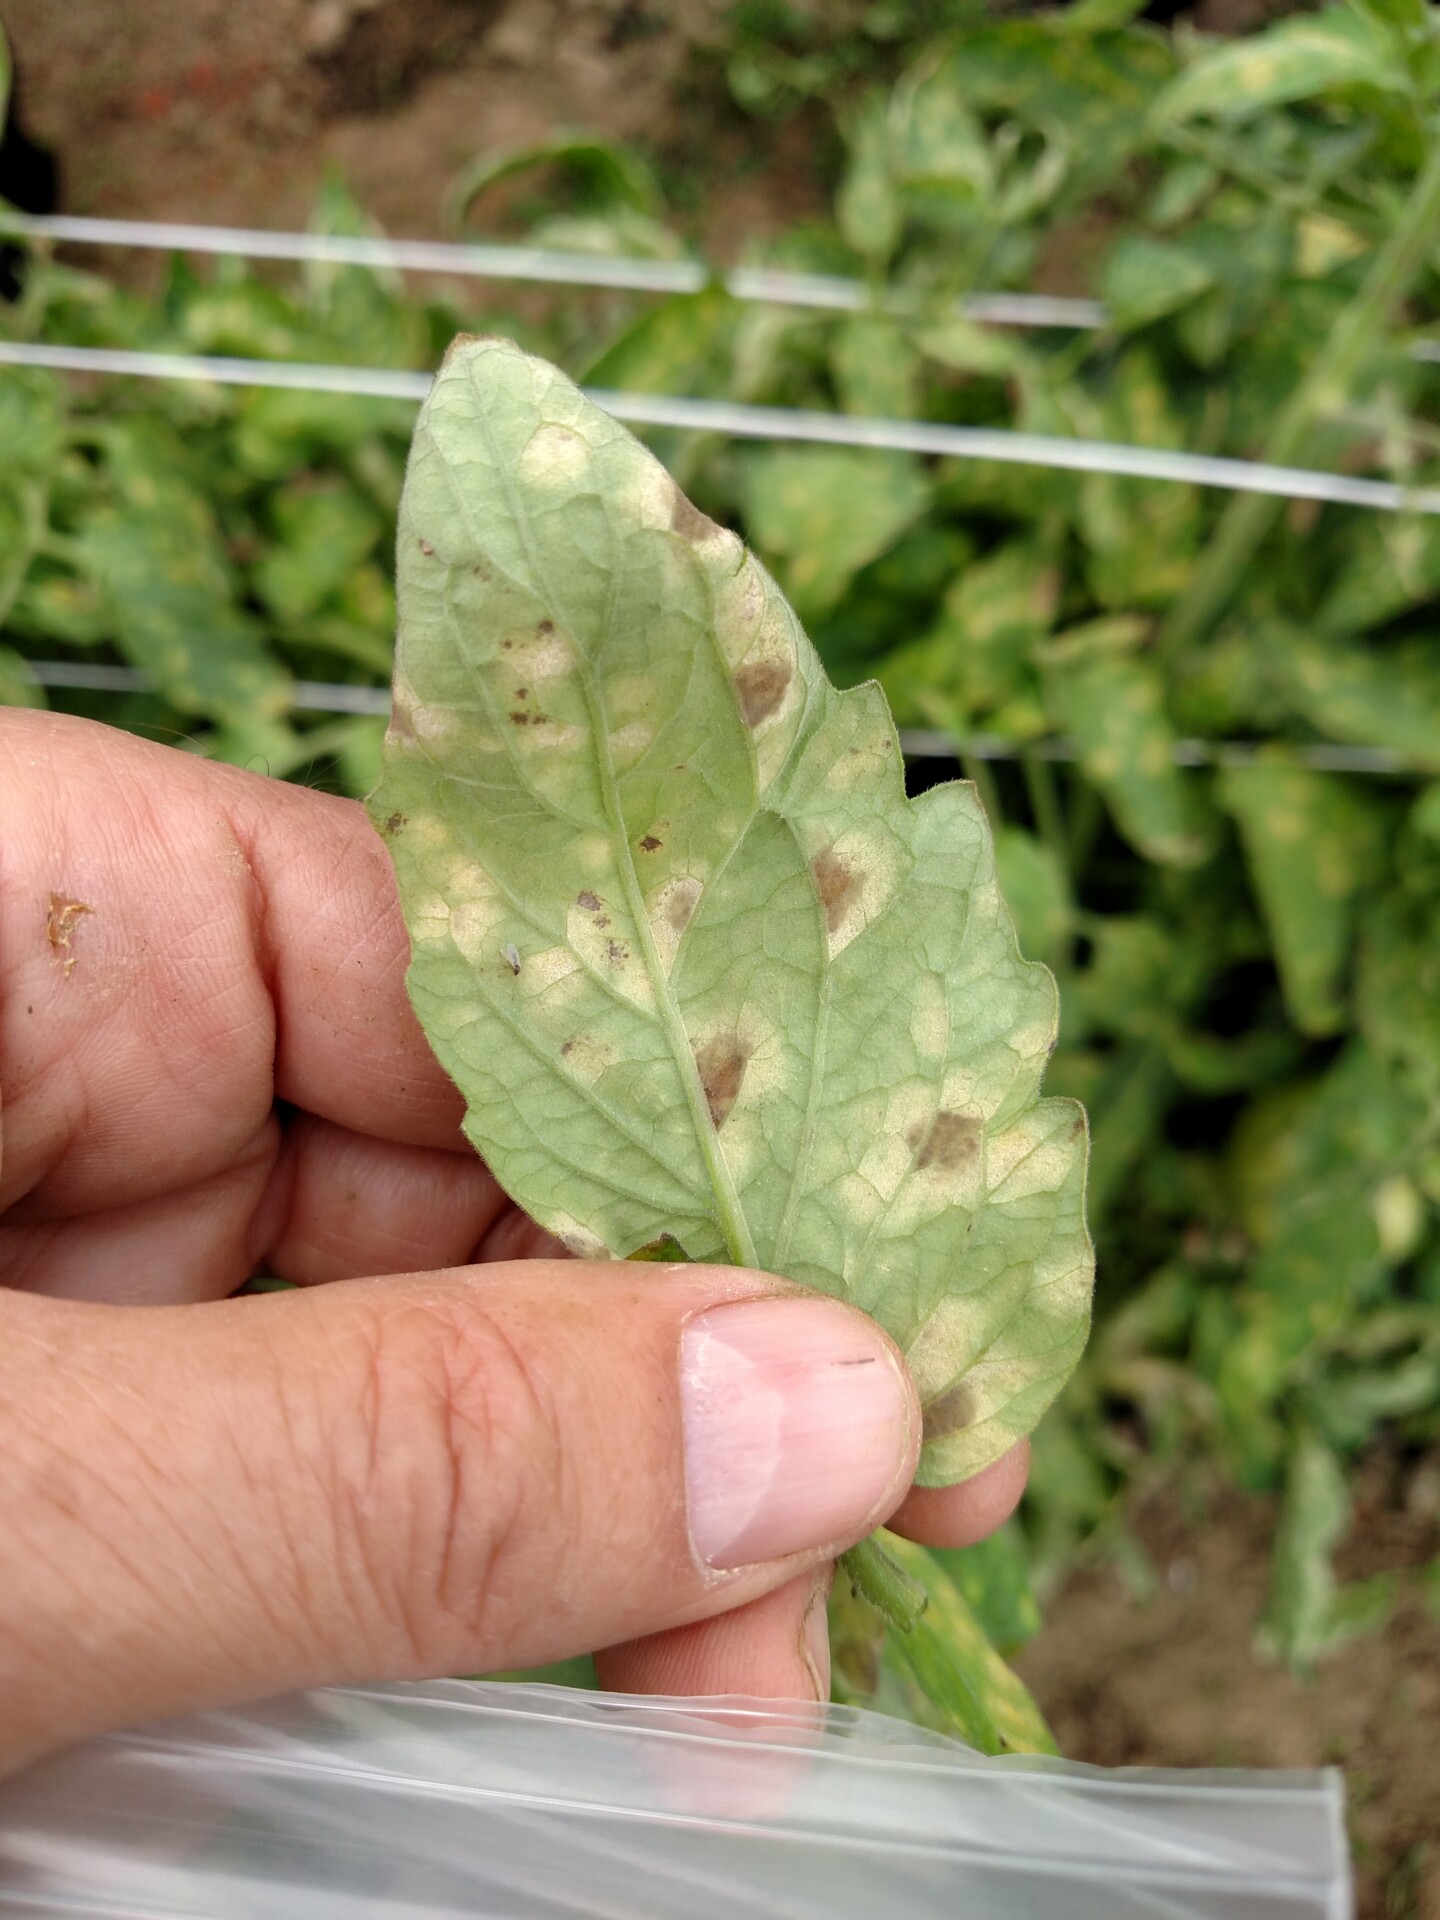 Figure 6. Underside of a leaf with tomato leaf mold.